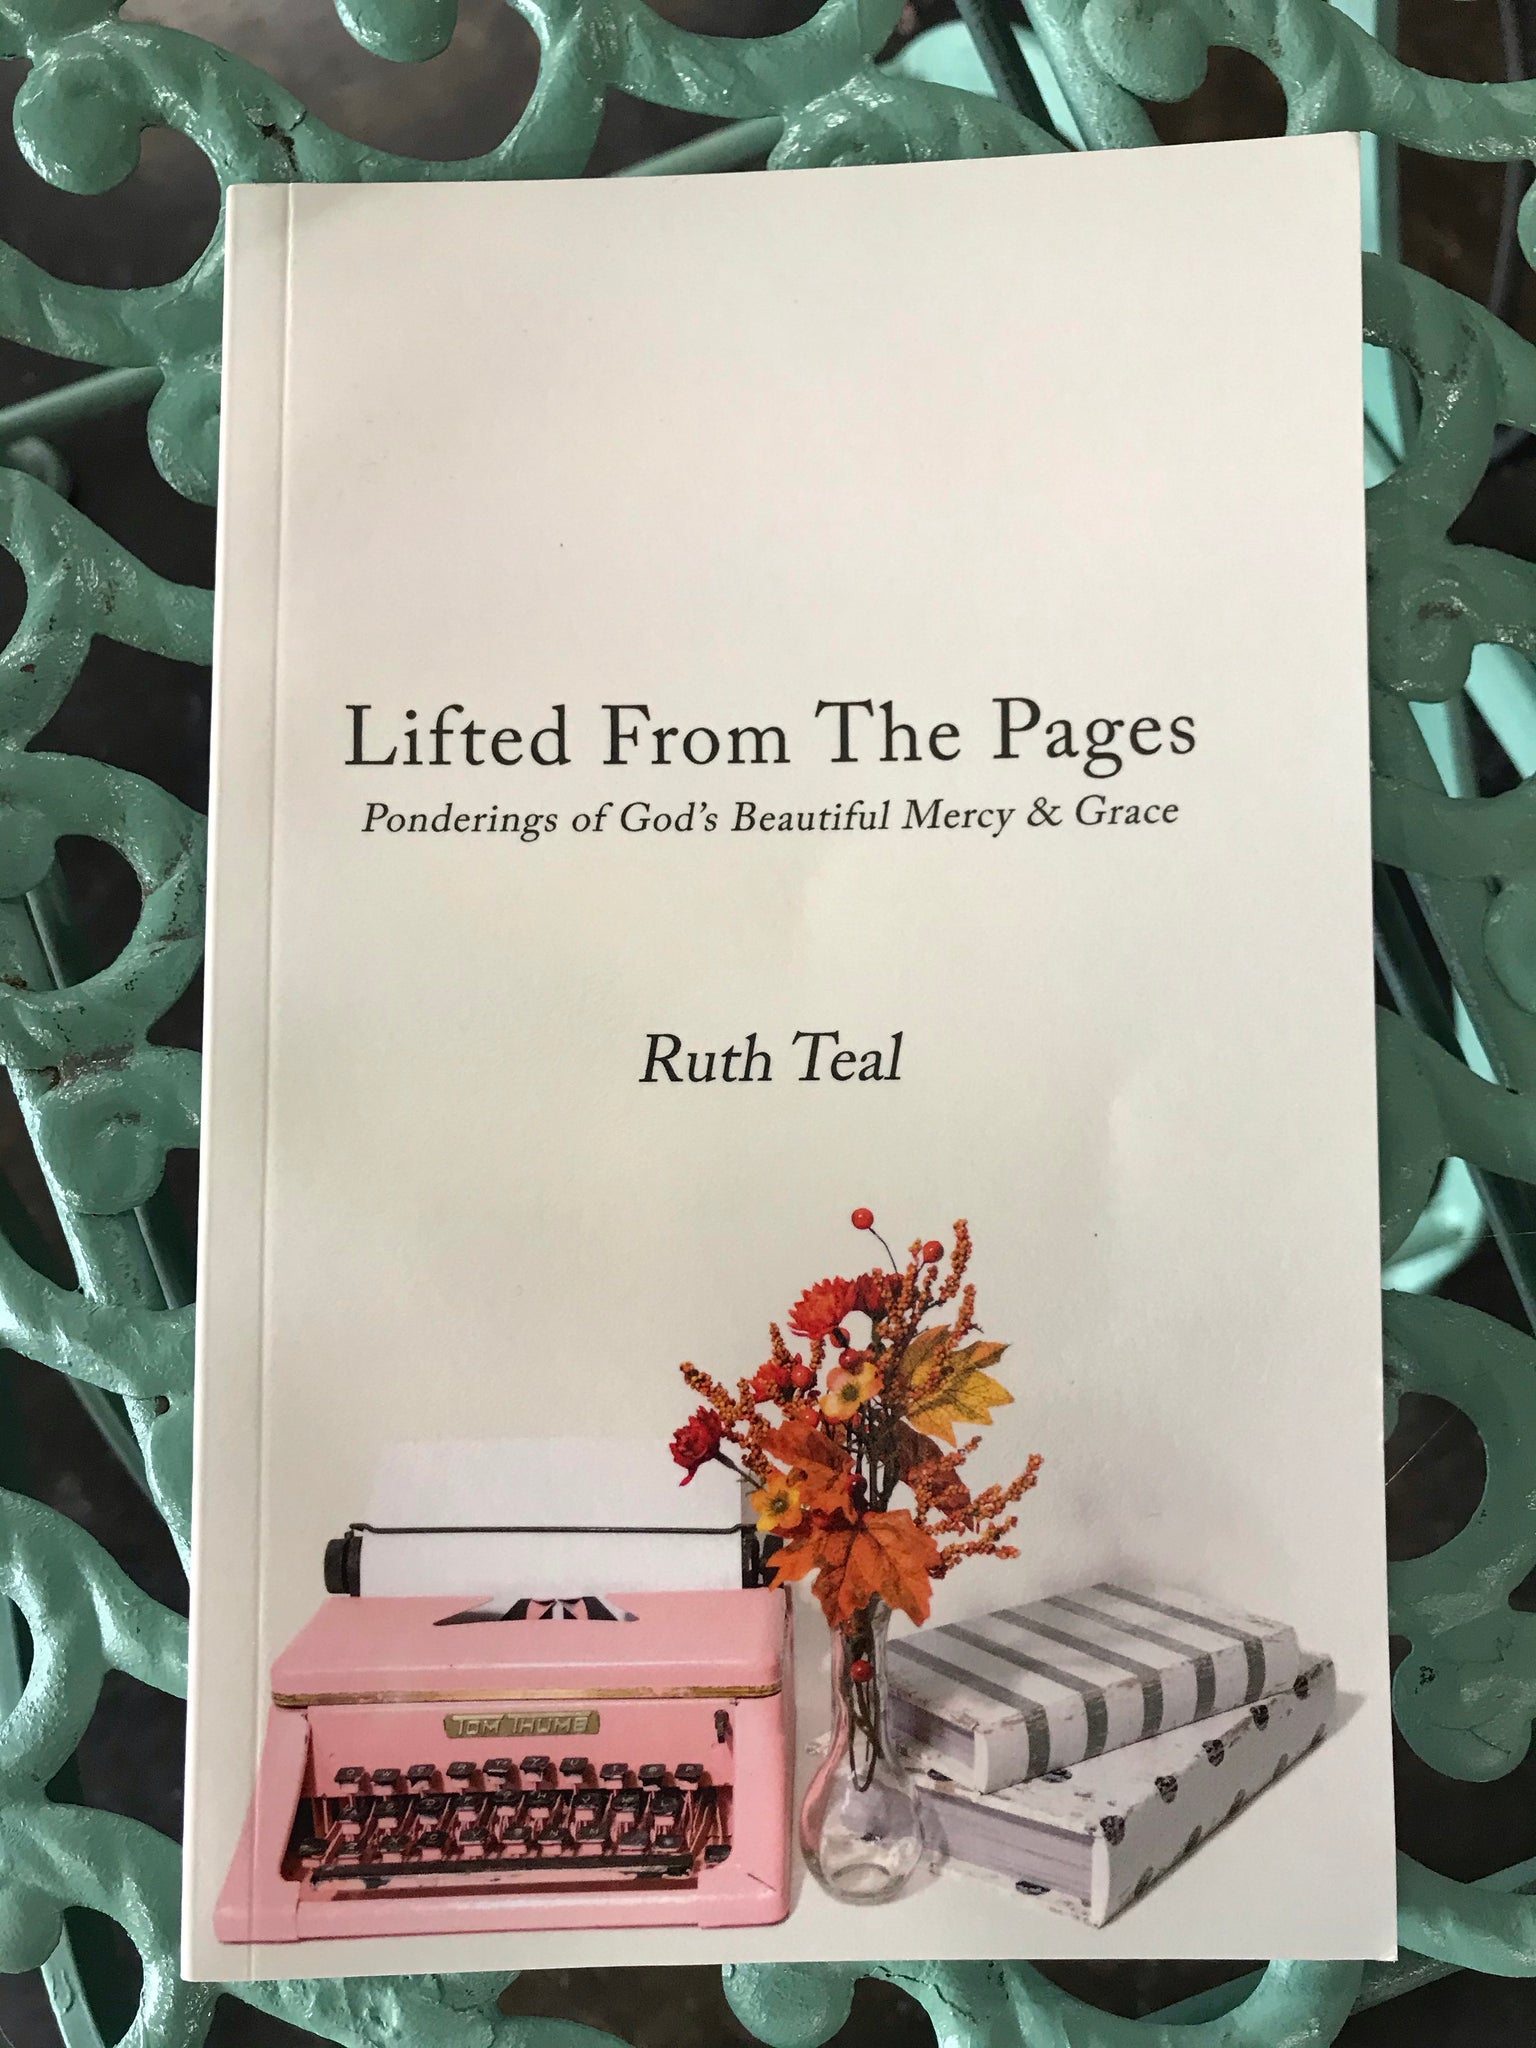 "Lifted From The Pages" by Ruth Teal